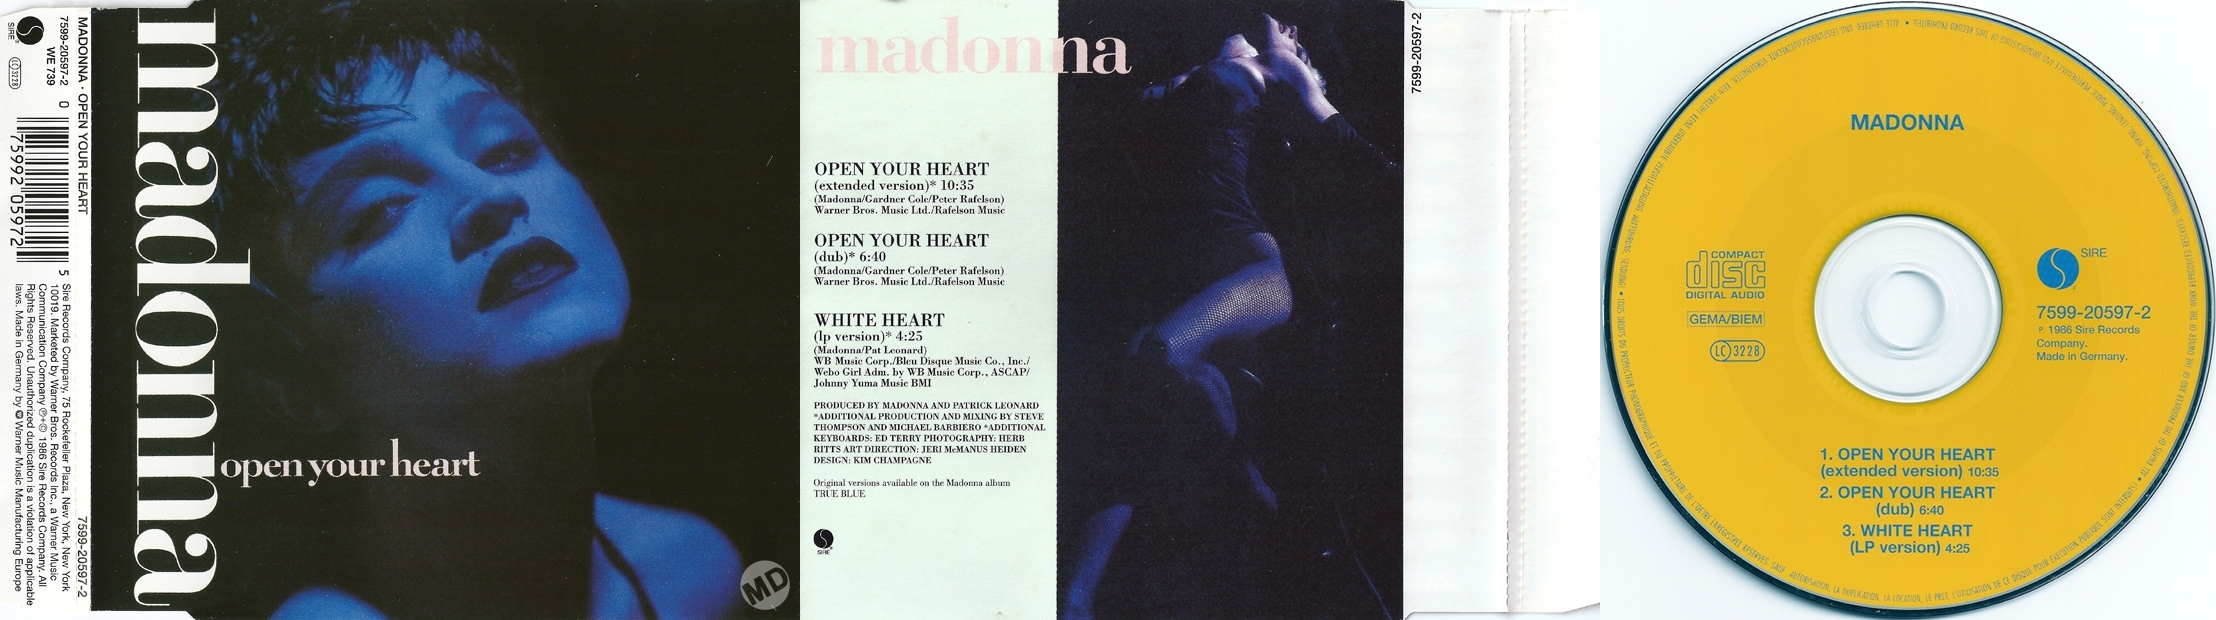 madonna-open-your-heart-cd-single-aleman